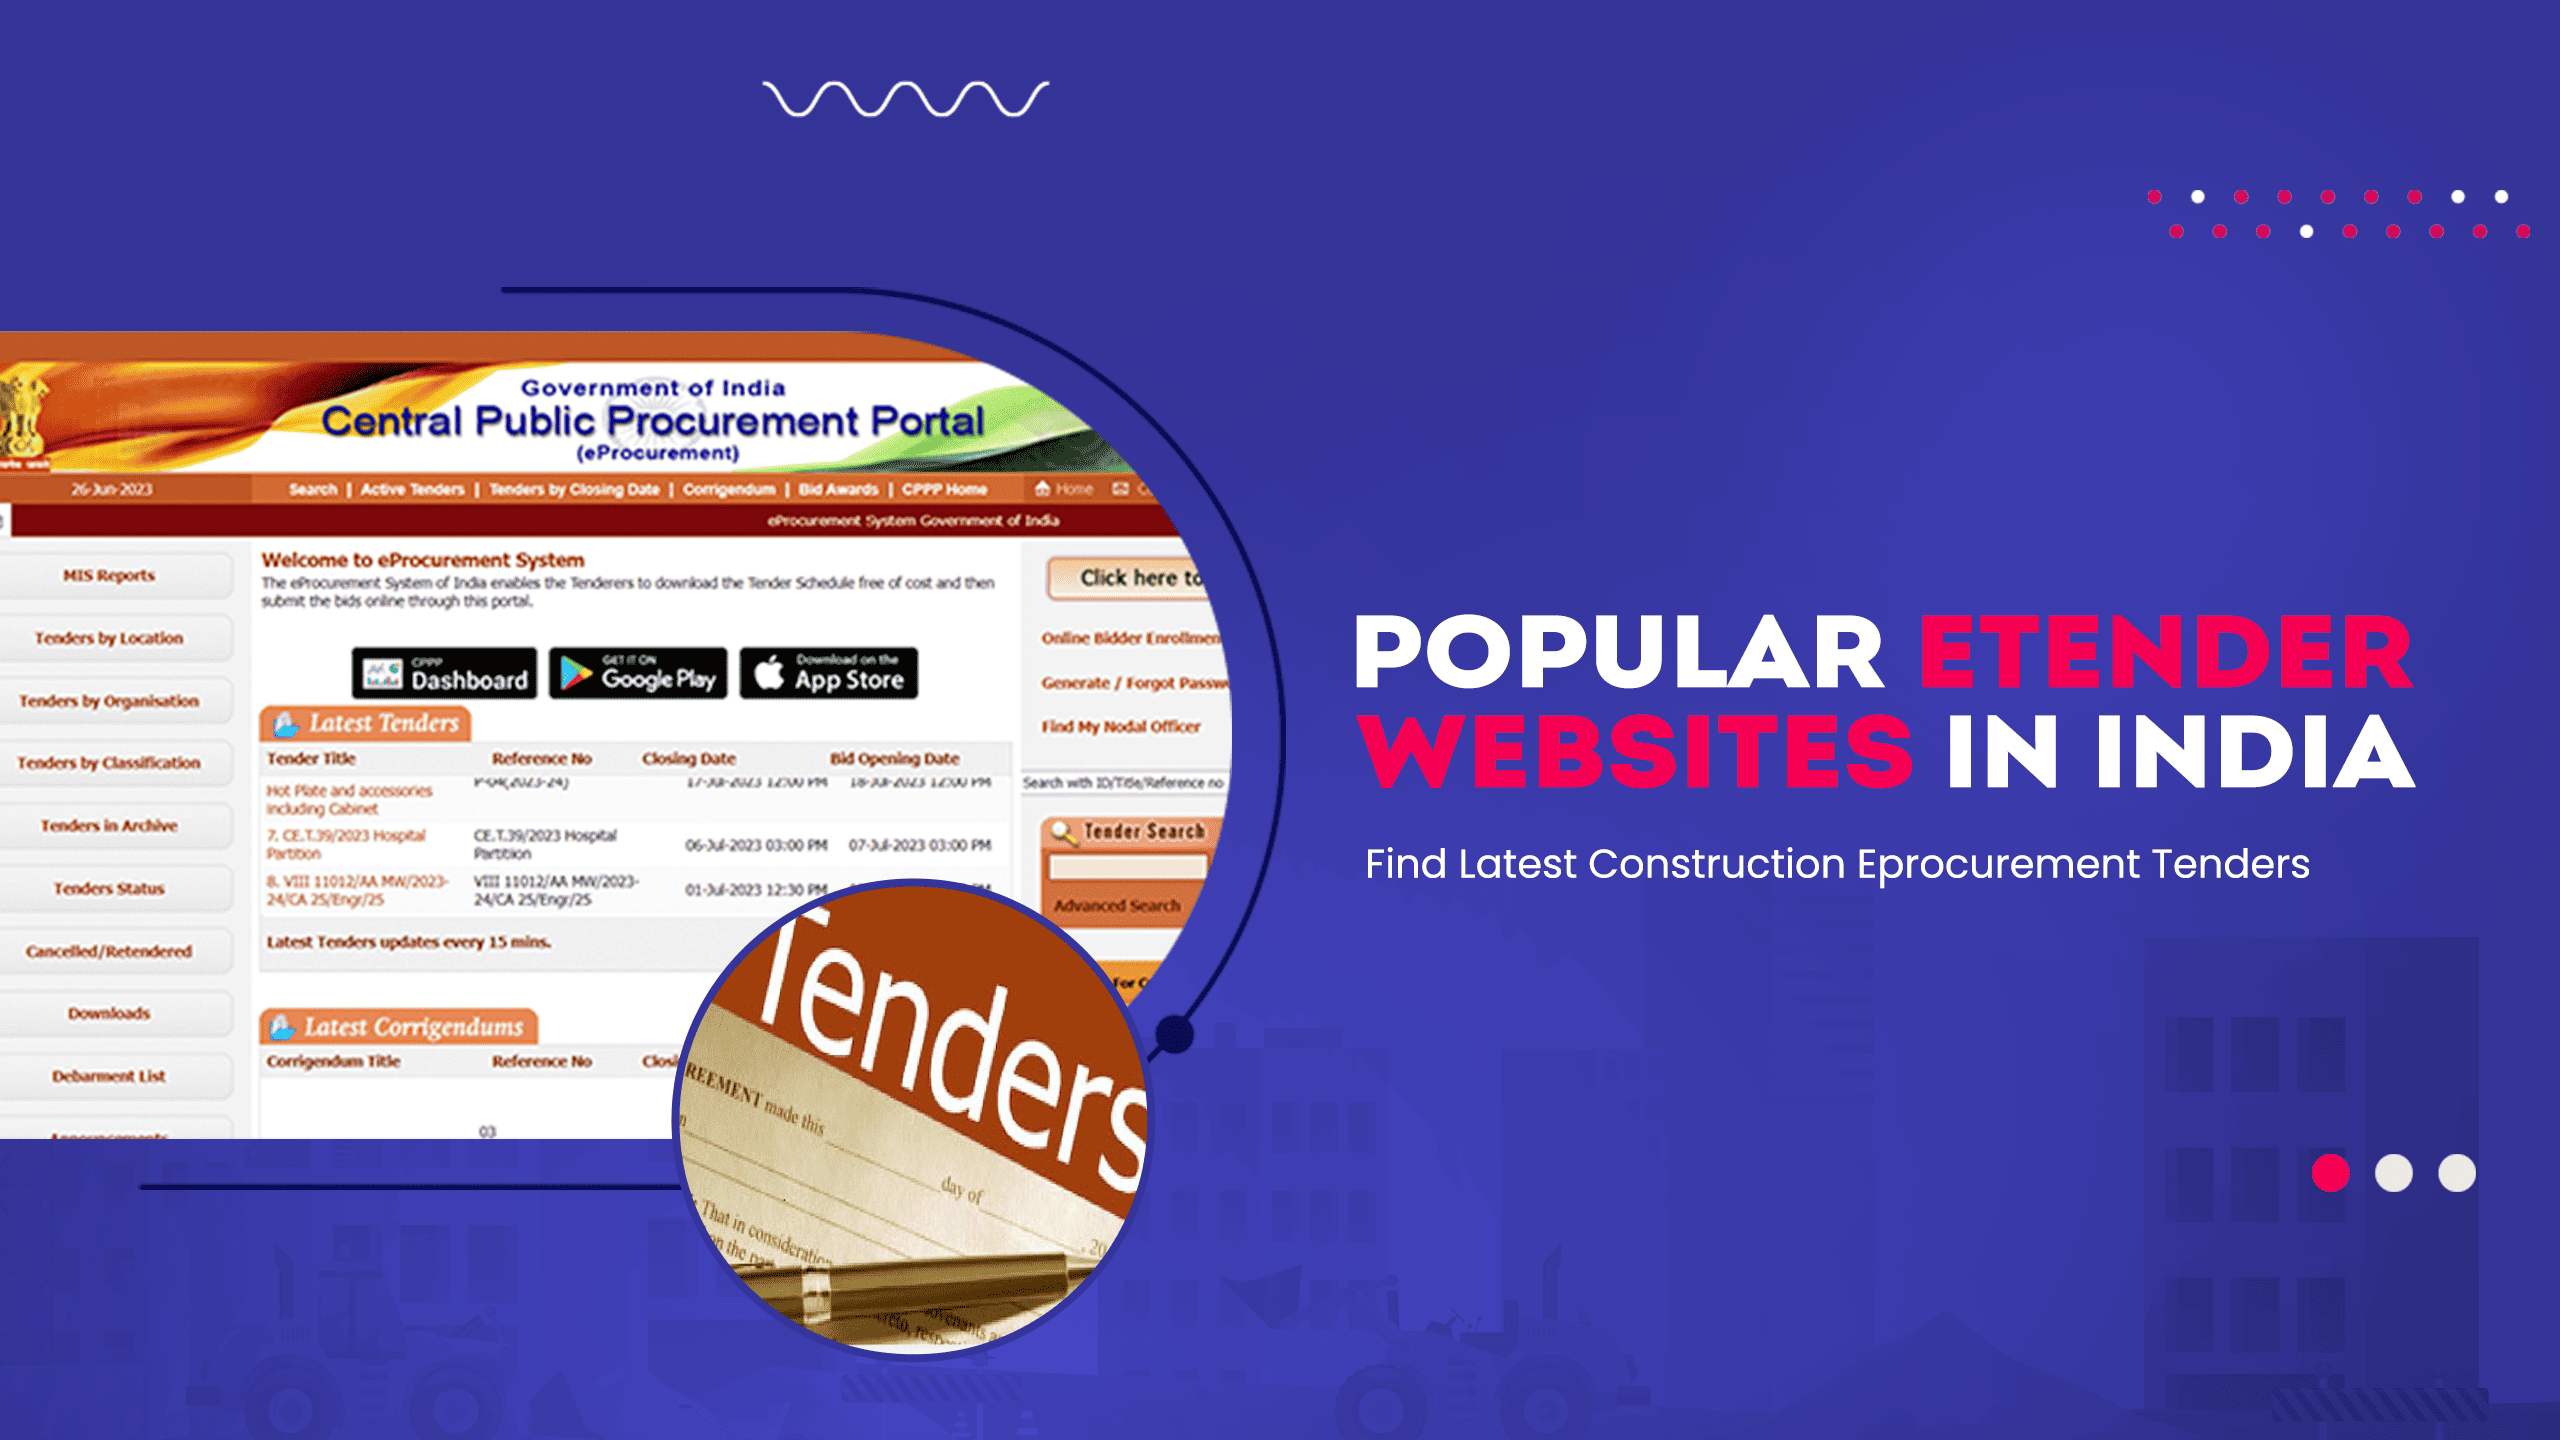 Image showing pictures of etendering. Image has the following heading text- Popular Etender websites in India